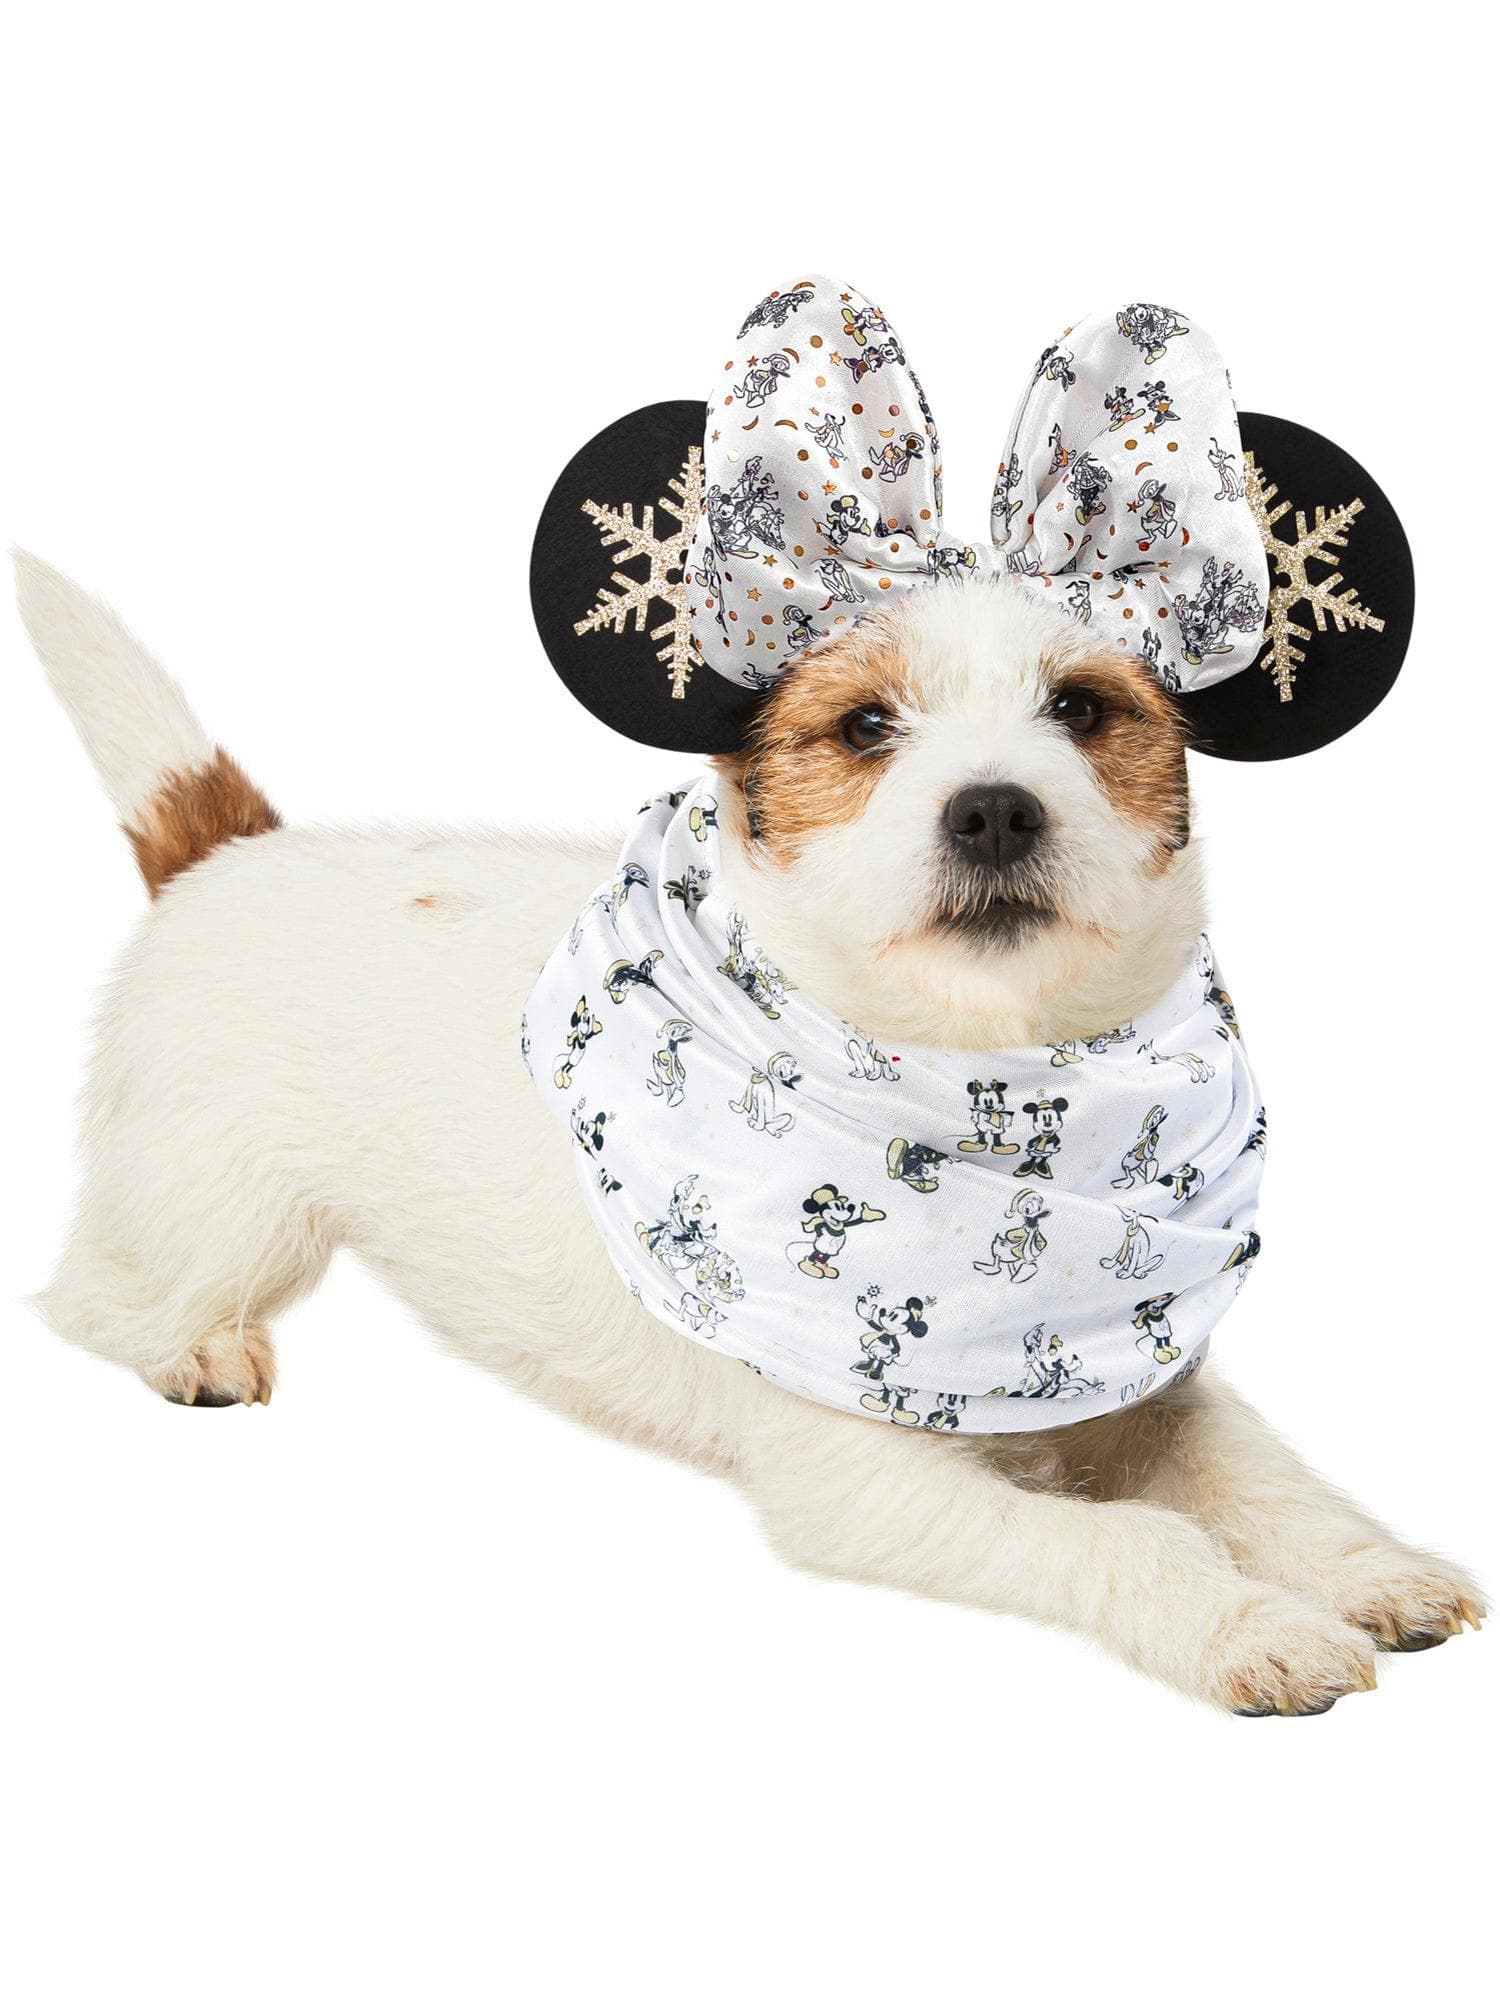 Winter White Minnie Mouse Holiday Pet Headpiece and Bandana - costumes.com